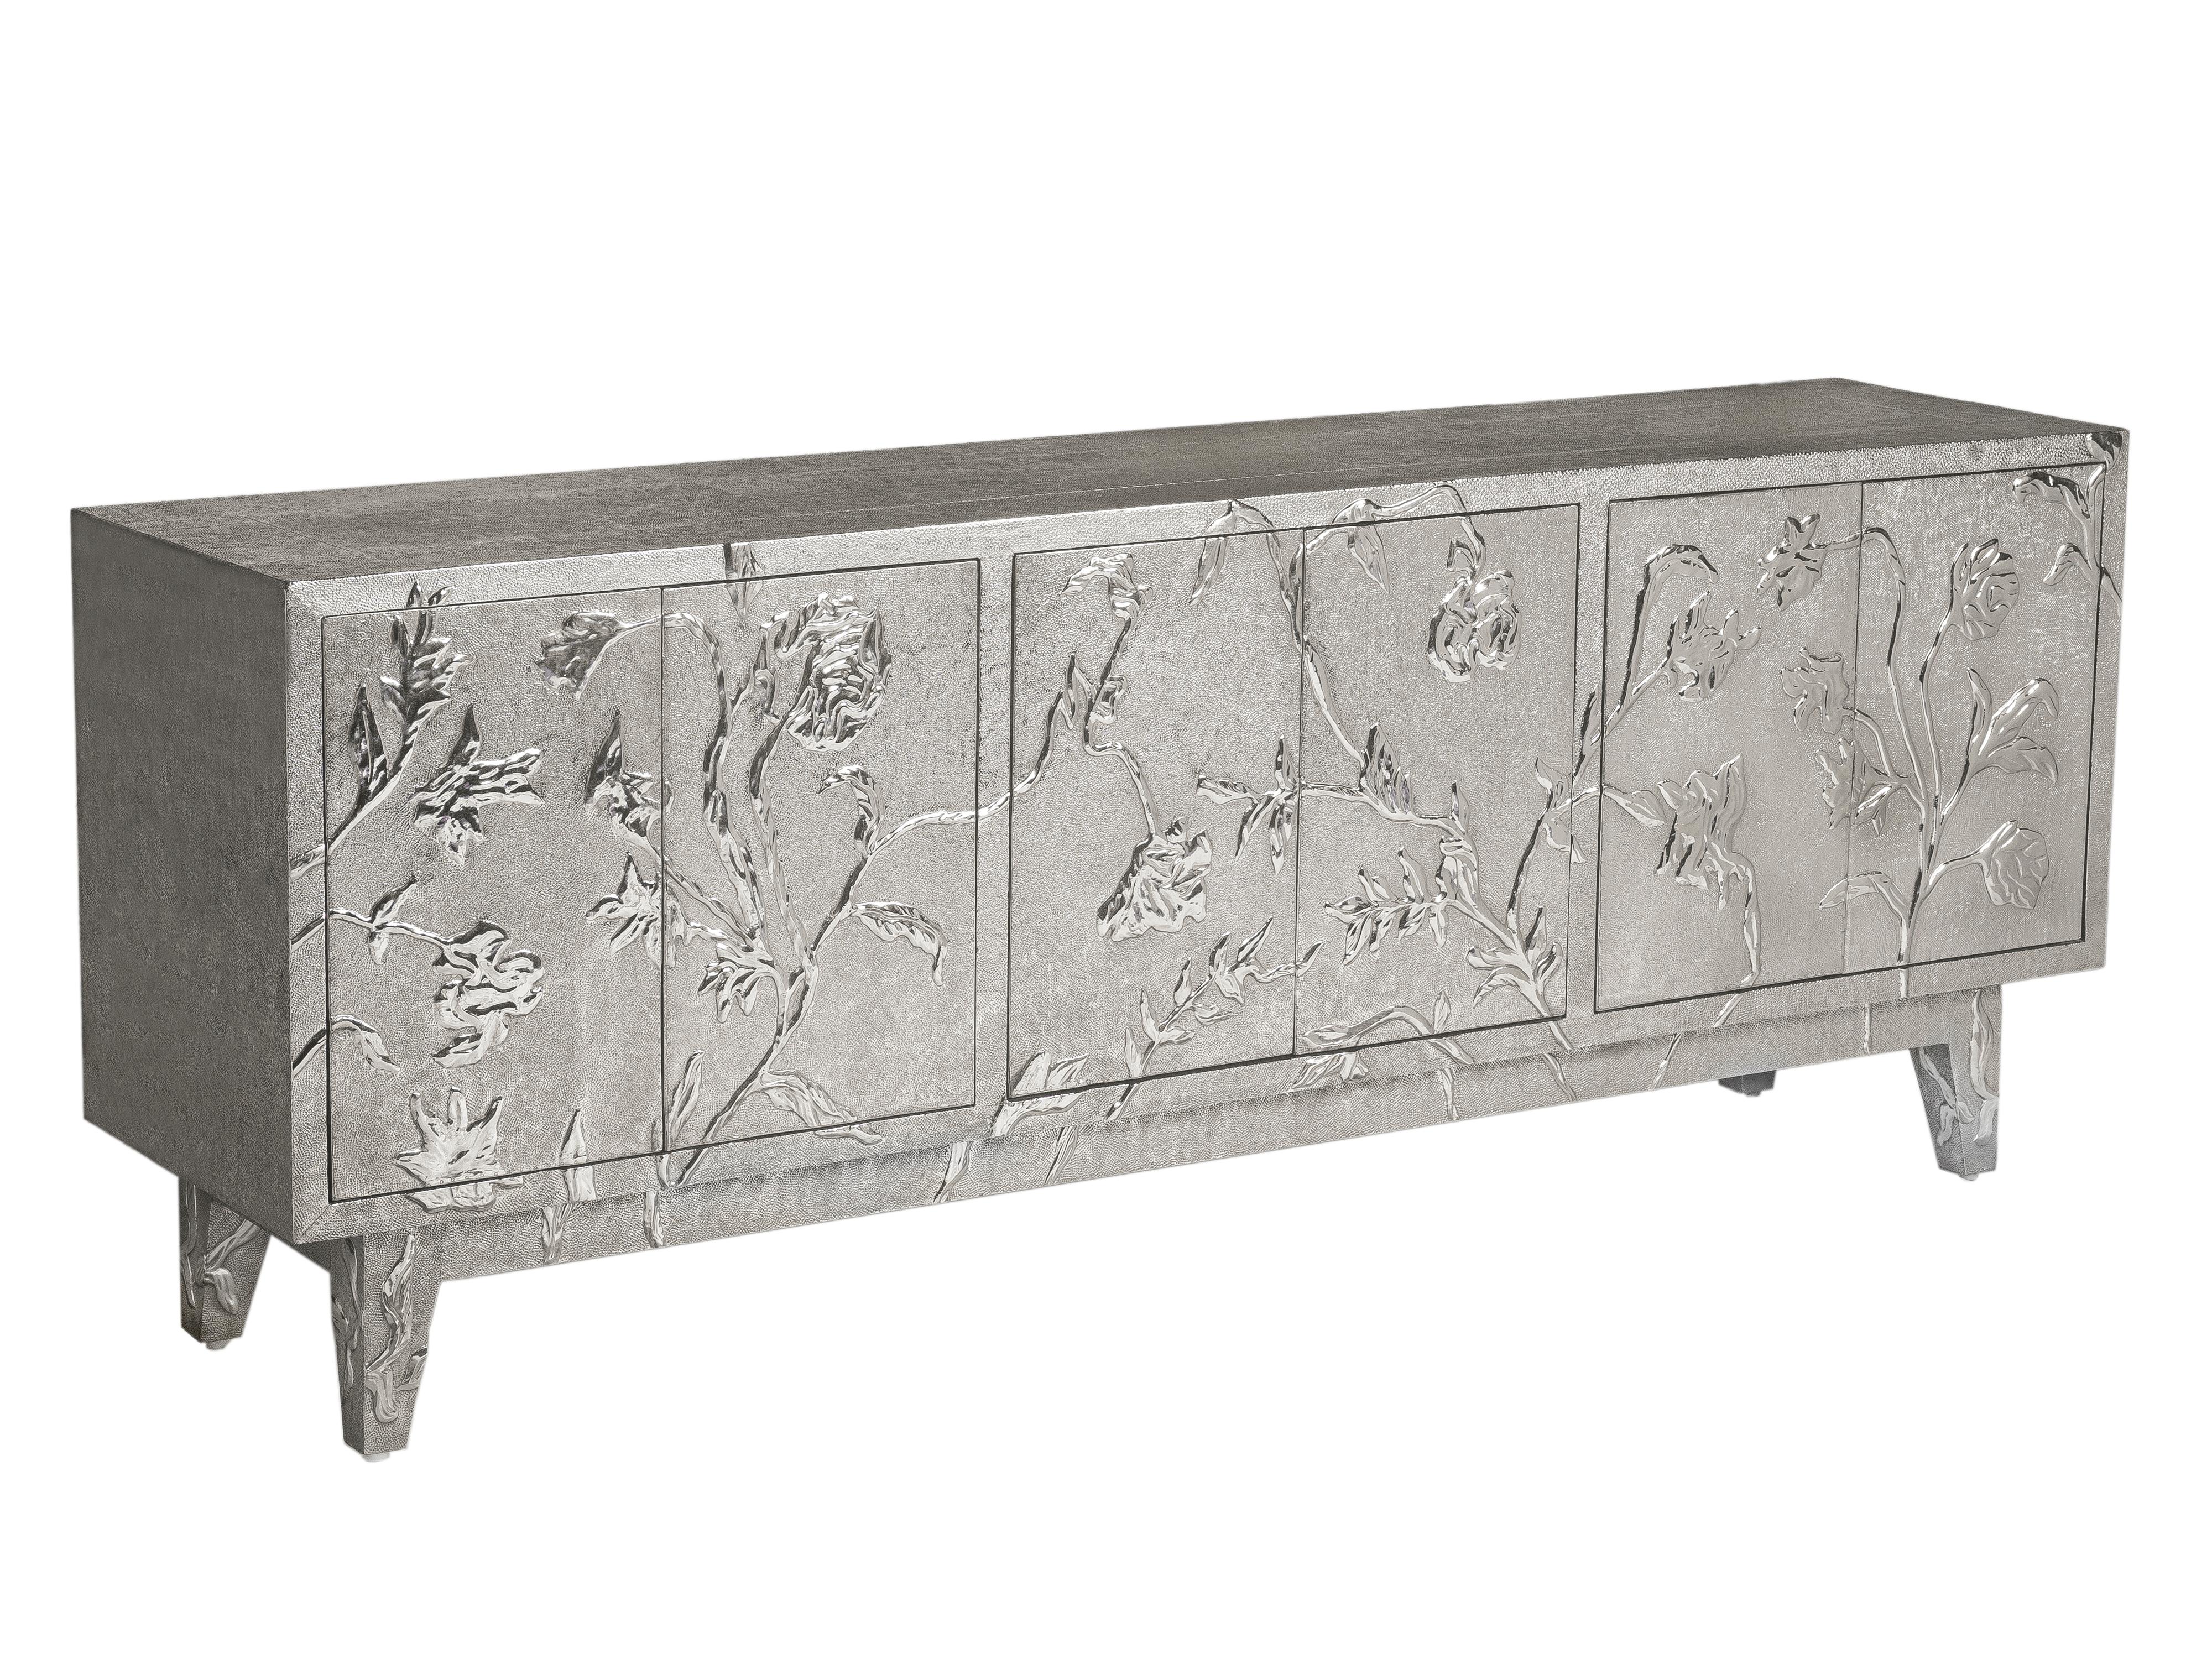 Hand-Carved Art Deco Buffet in Floral Design by Stephanie Odegard For Sale